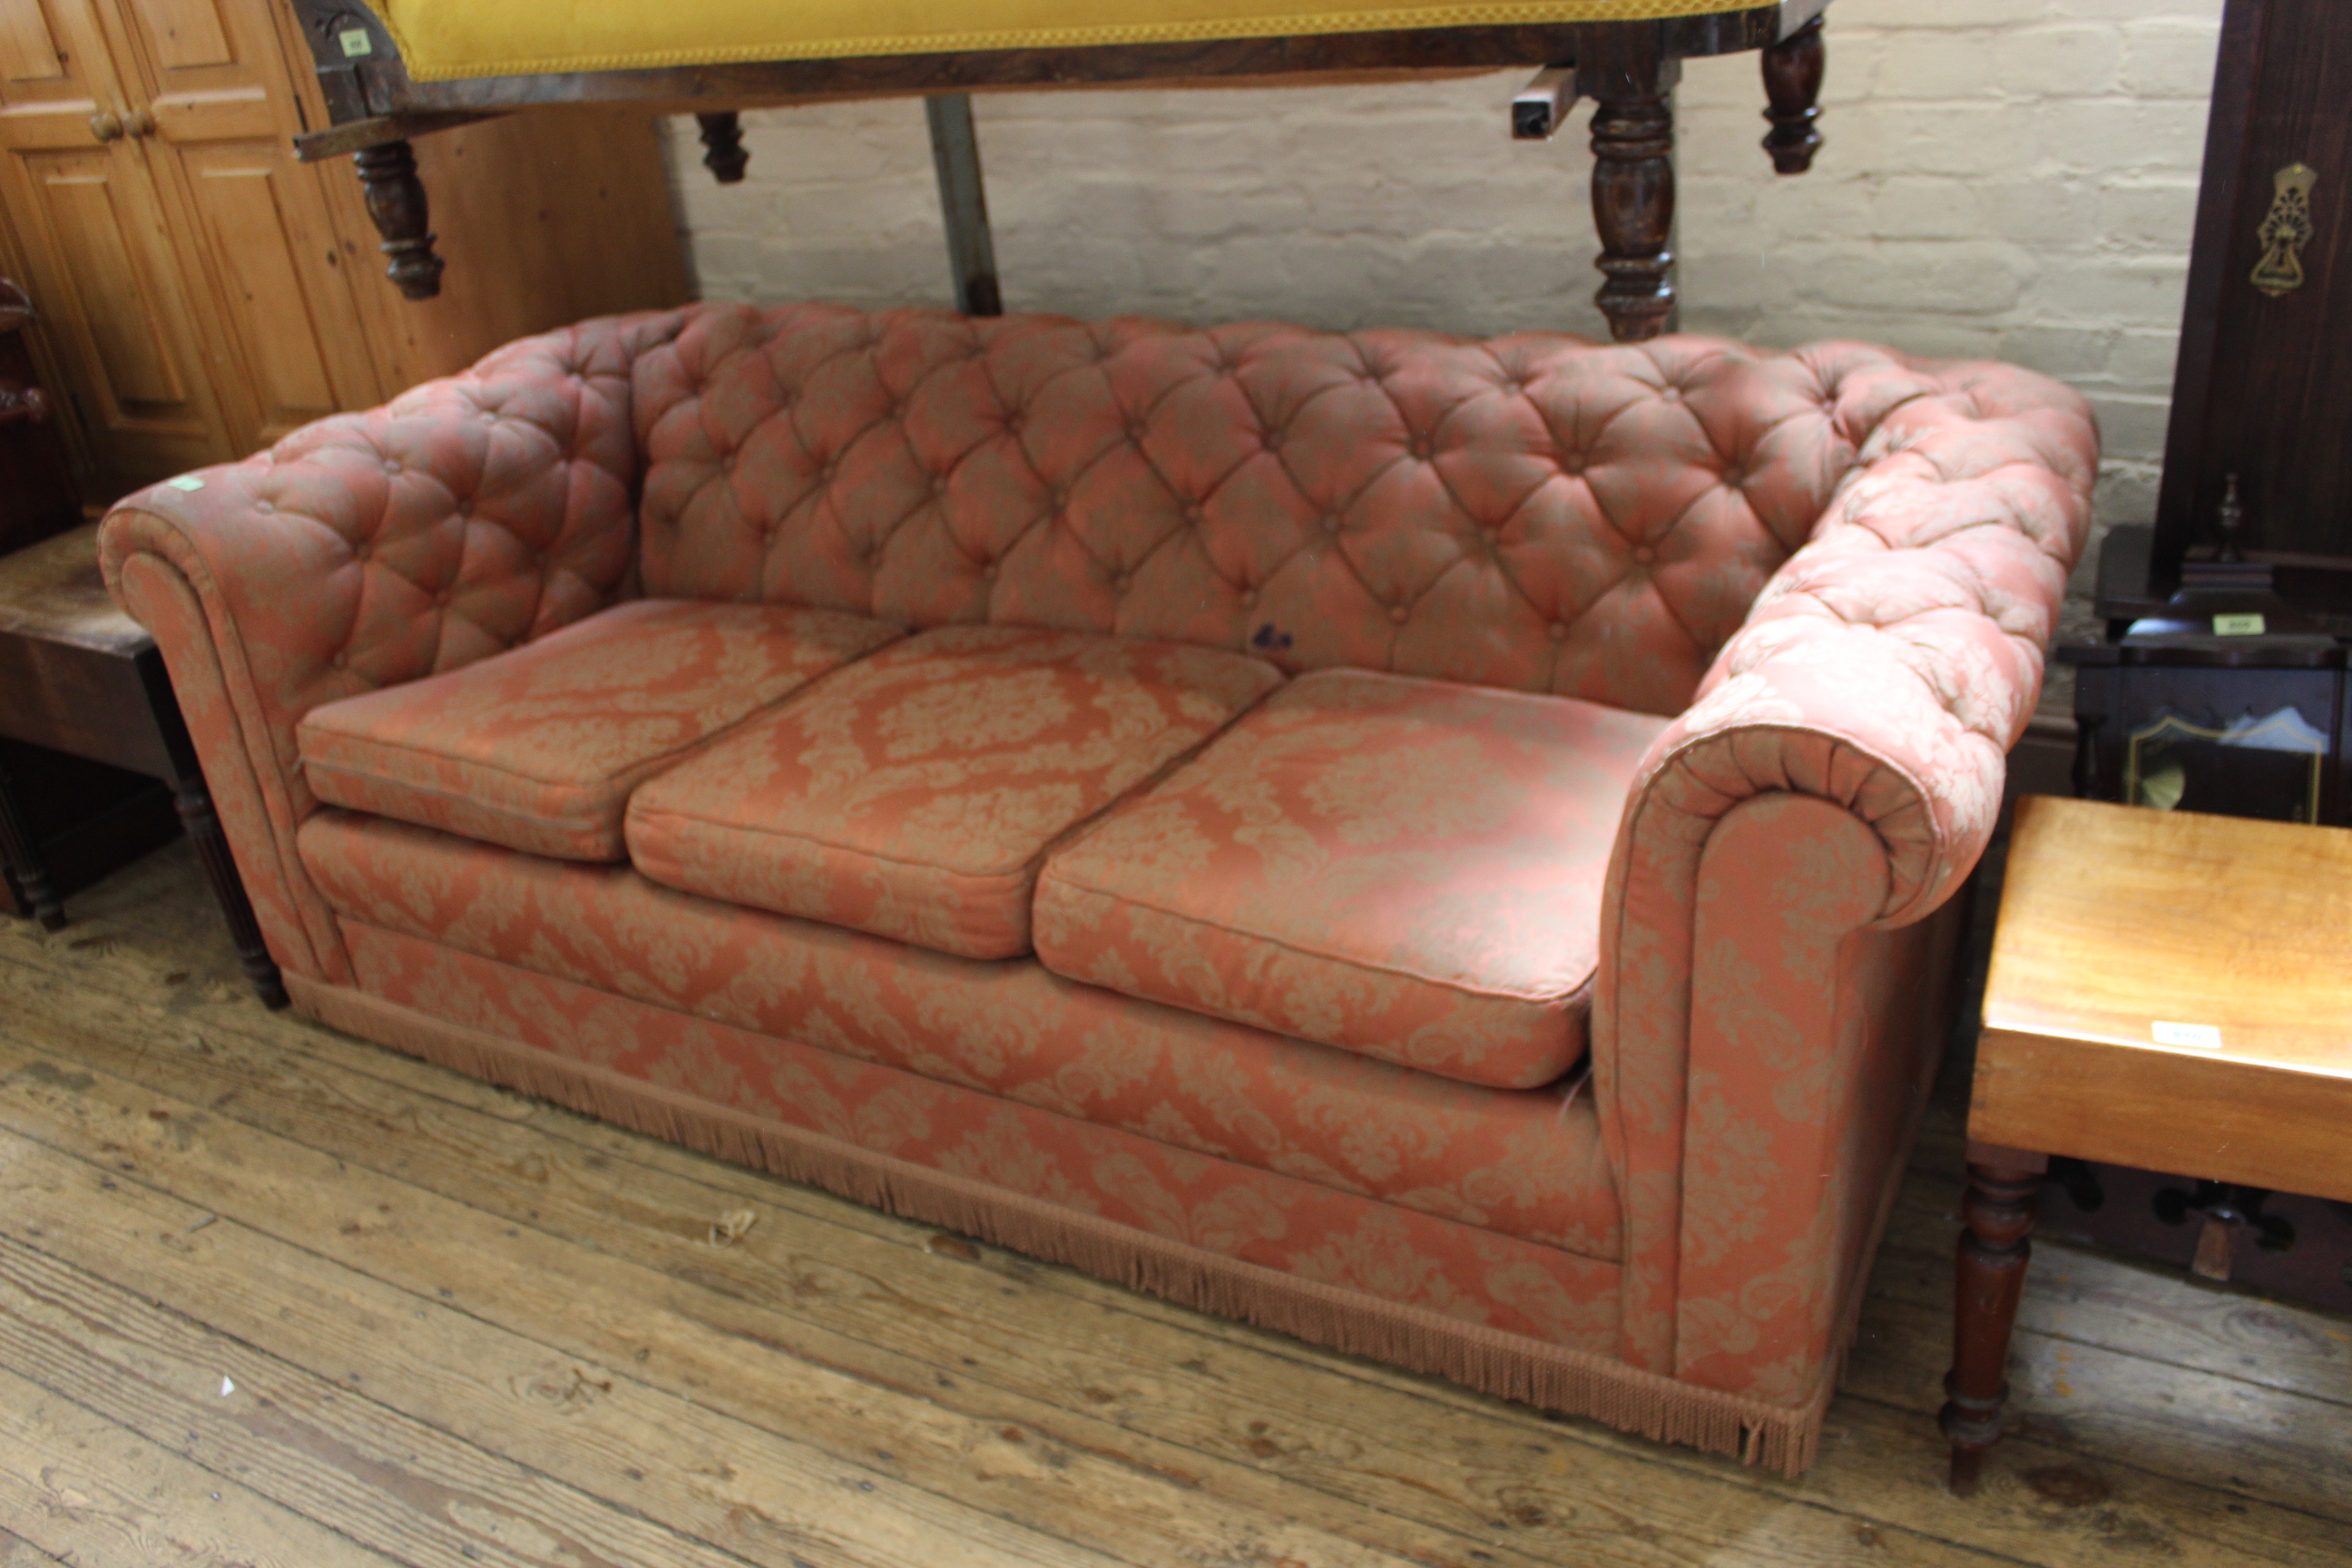 An upholstered three seater Chesterfield style button back sofa